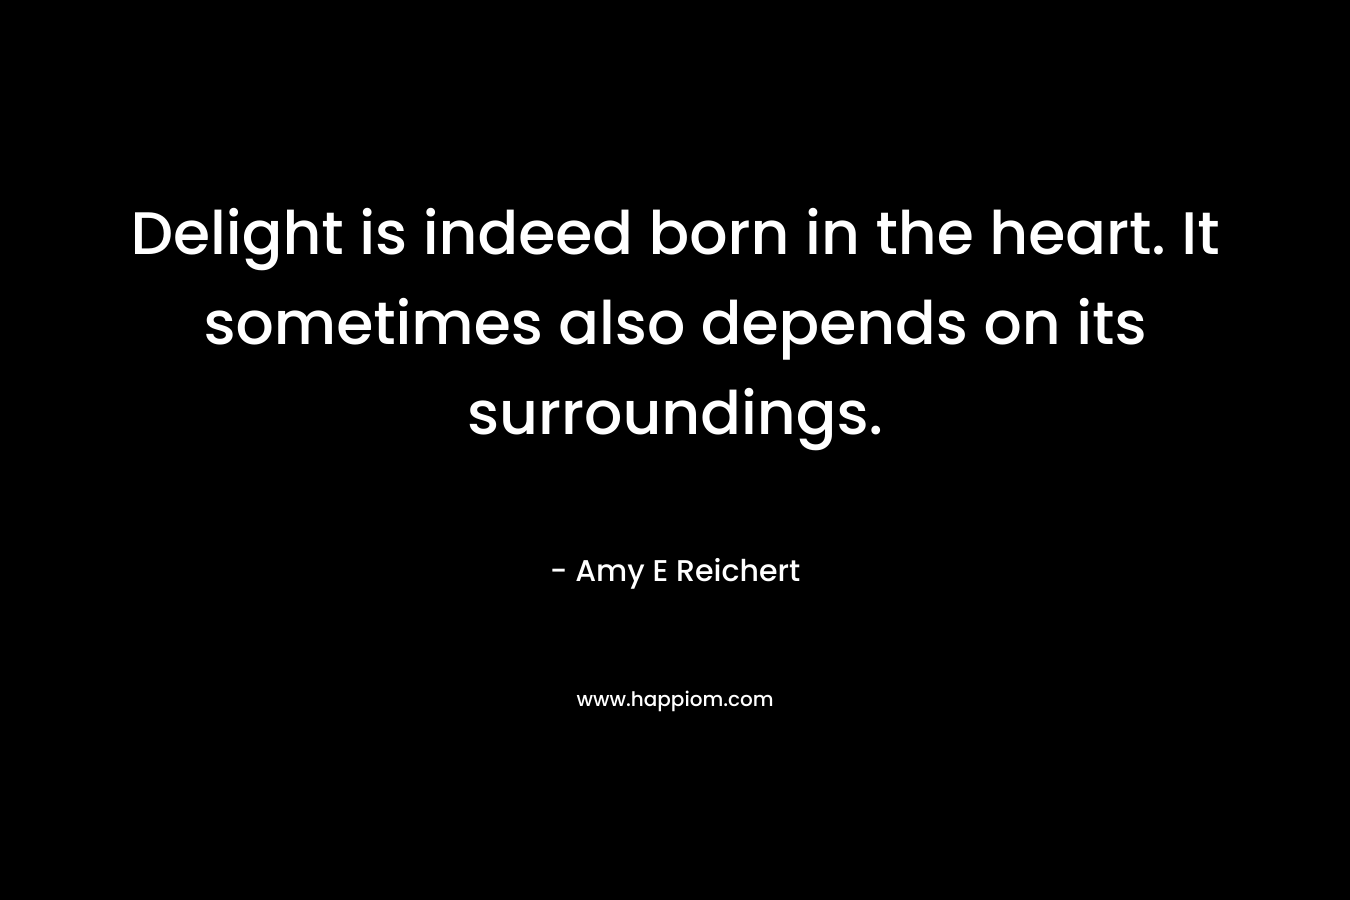 Delight is indeed born in the heart. It sometimes also depends on its surroundings.